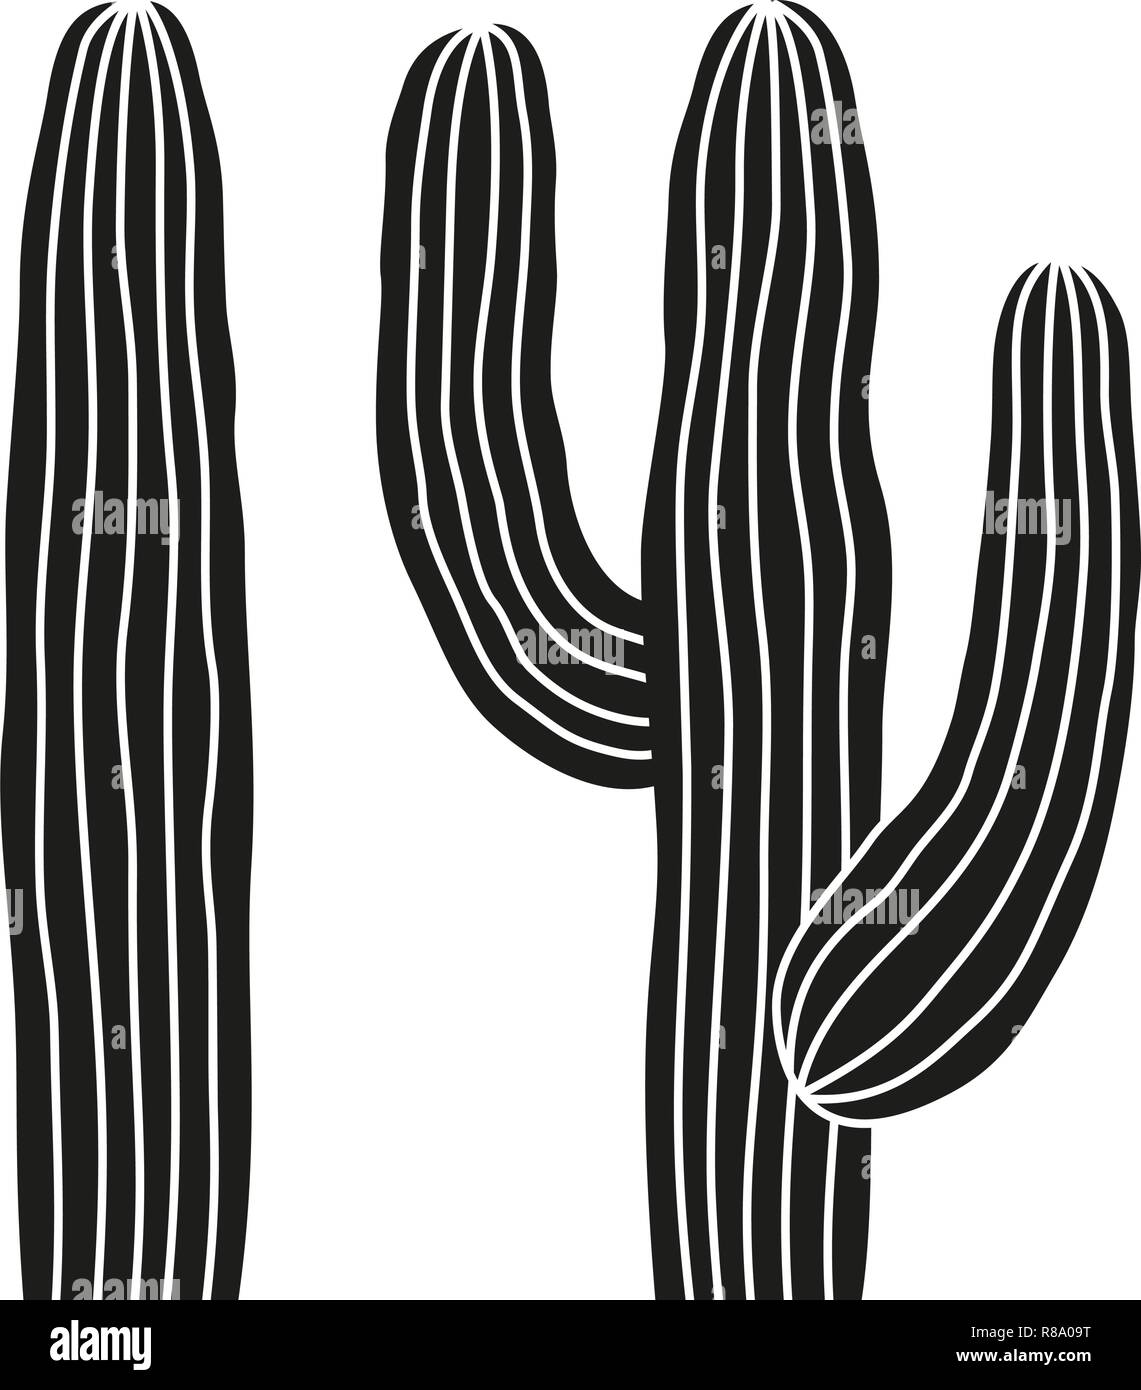 26+ Thousand Cactus Silhouette Royalty-Free Images, Stock Photos